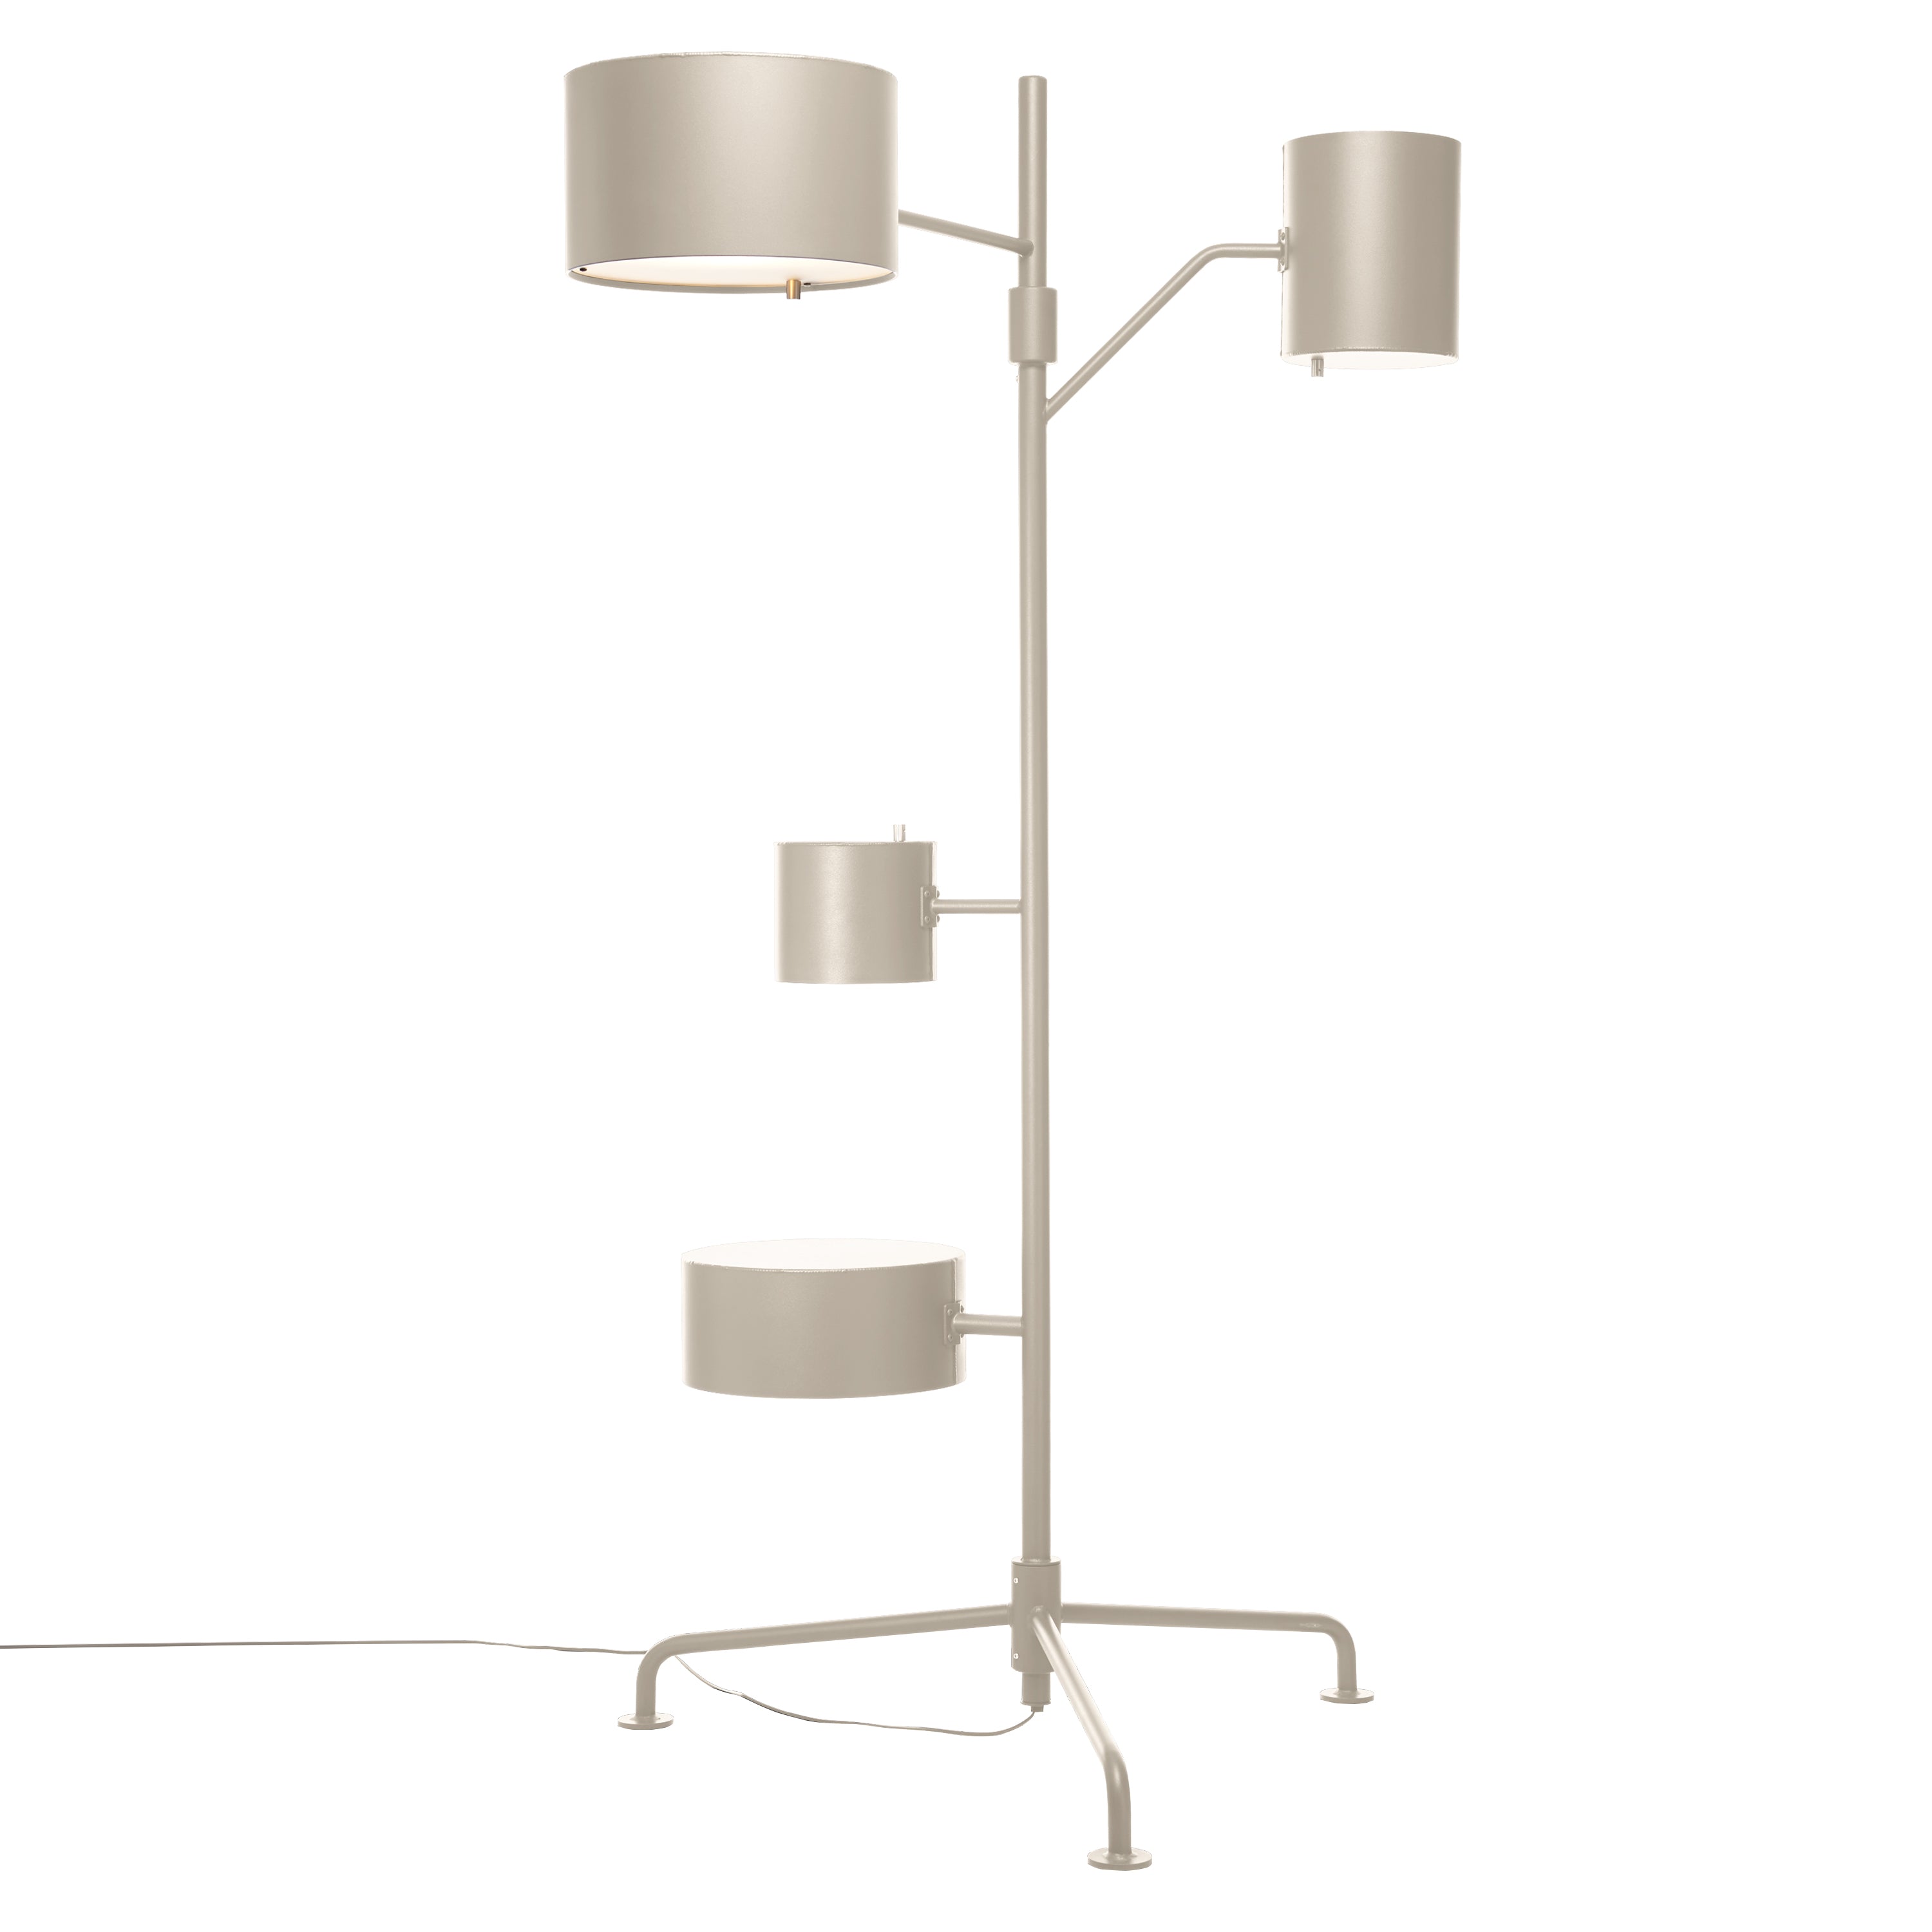 Statistocrat Floor Lamp: RAL 1013 - Oyster White